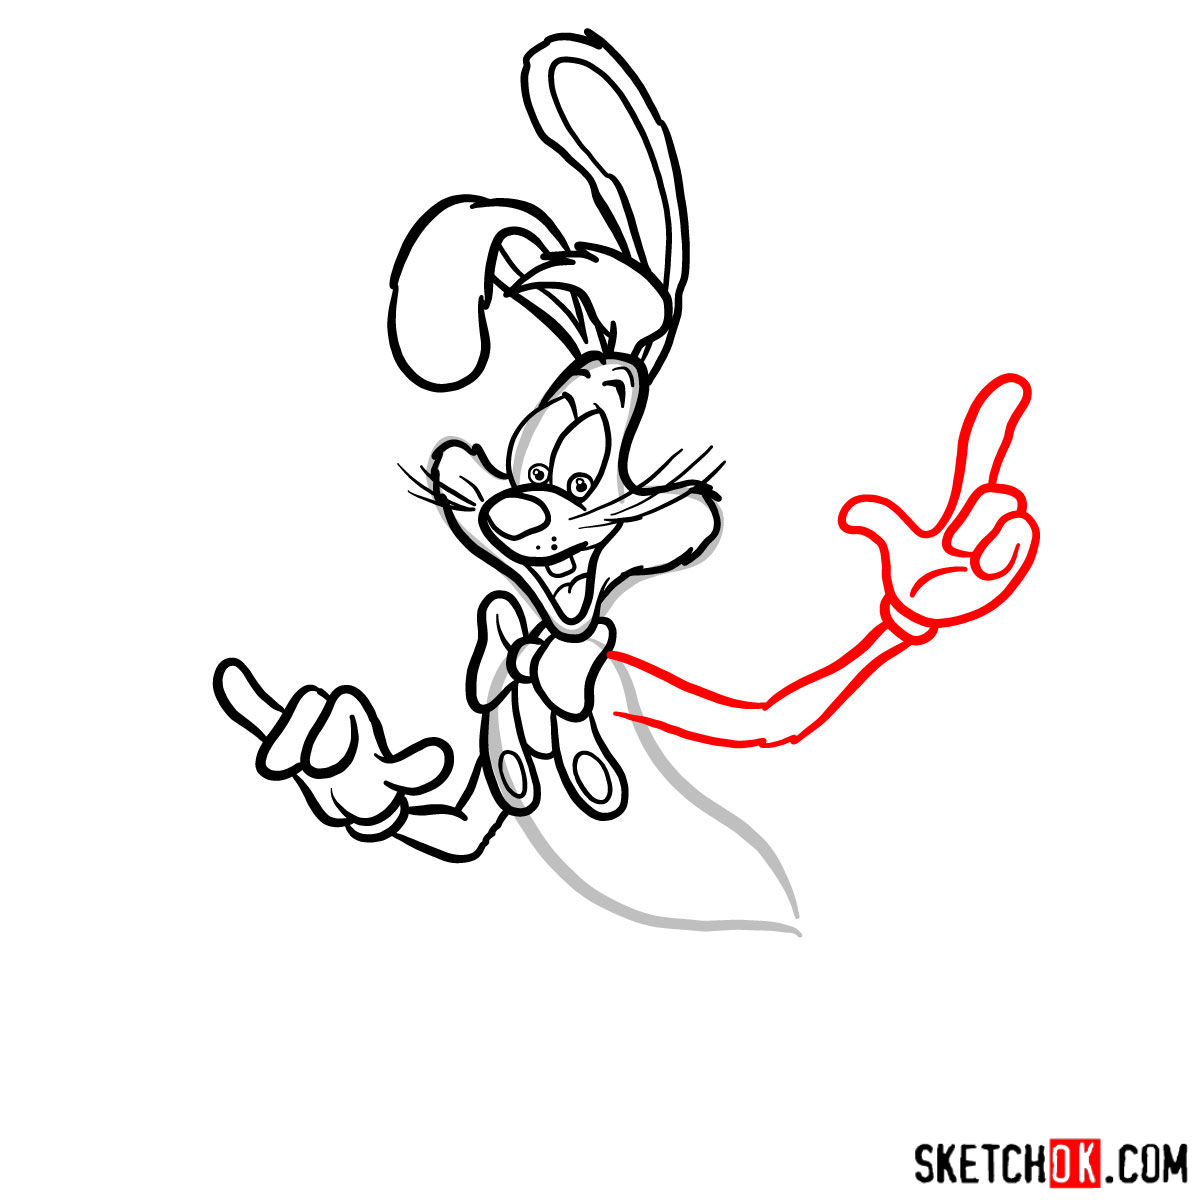 How to draw Roger Rabbit - step 09